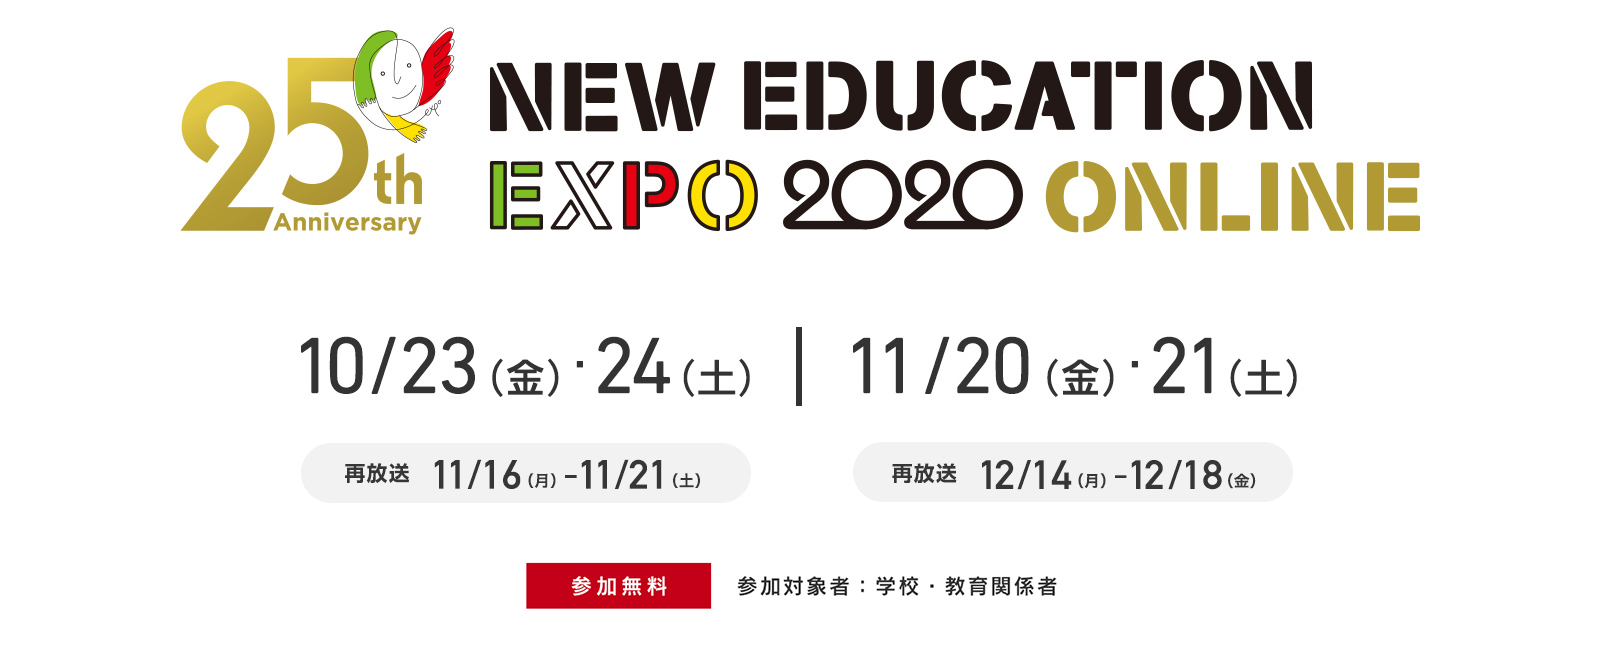 NEW EDUCATION EXPO 2020 ONLINE